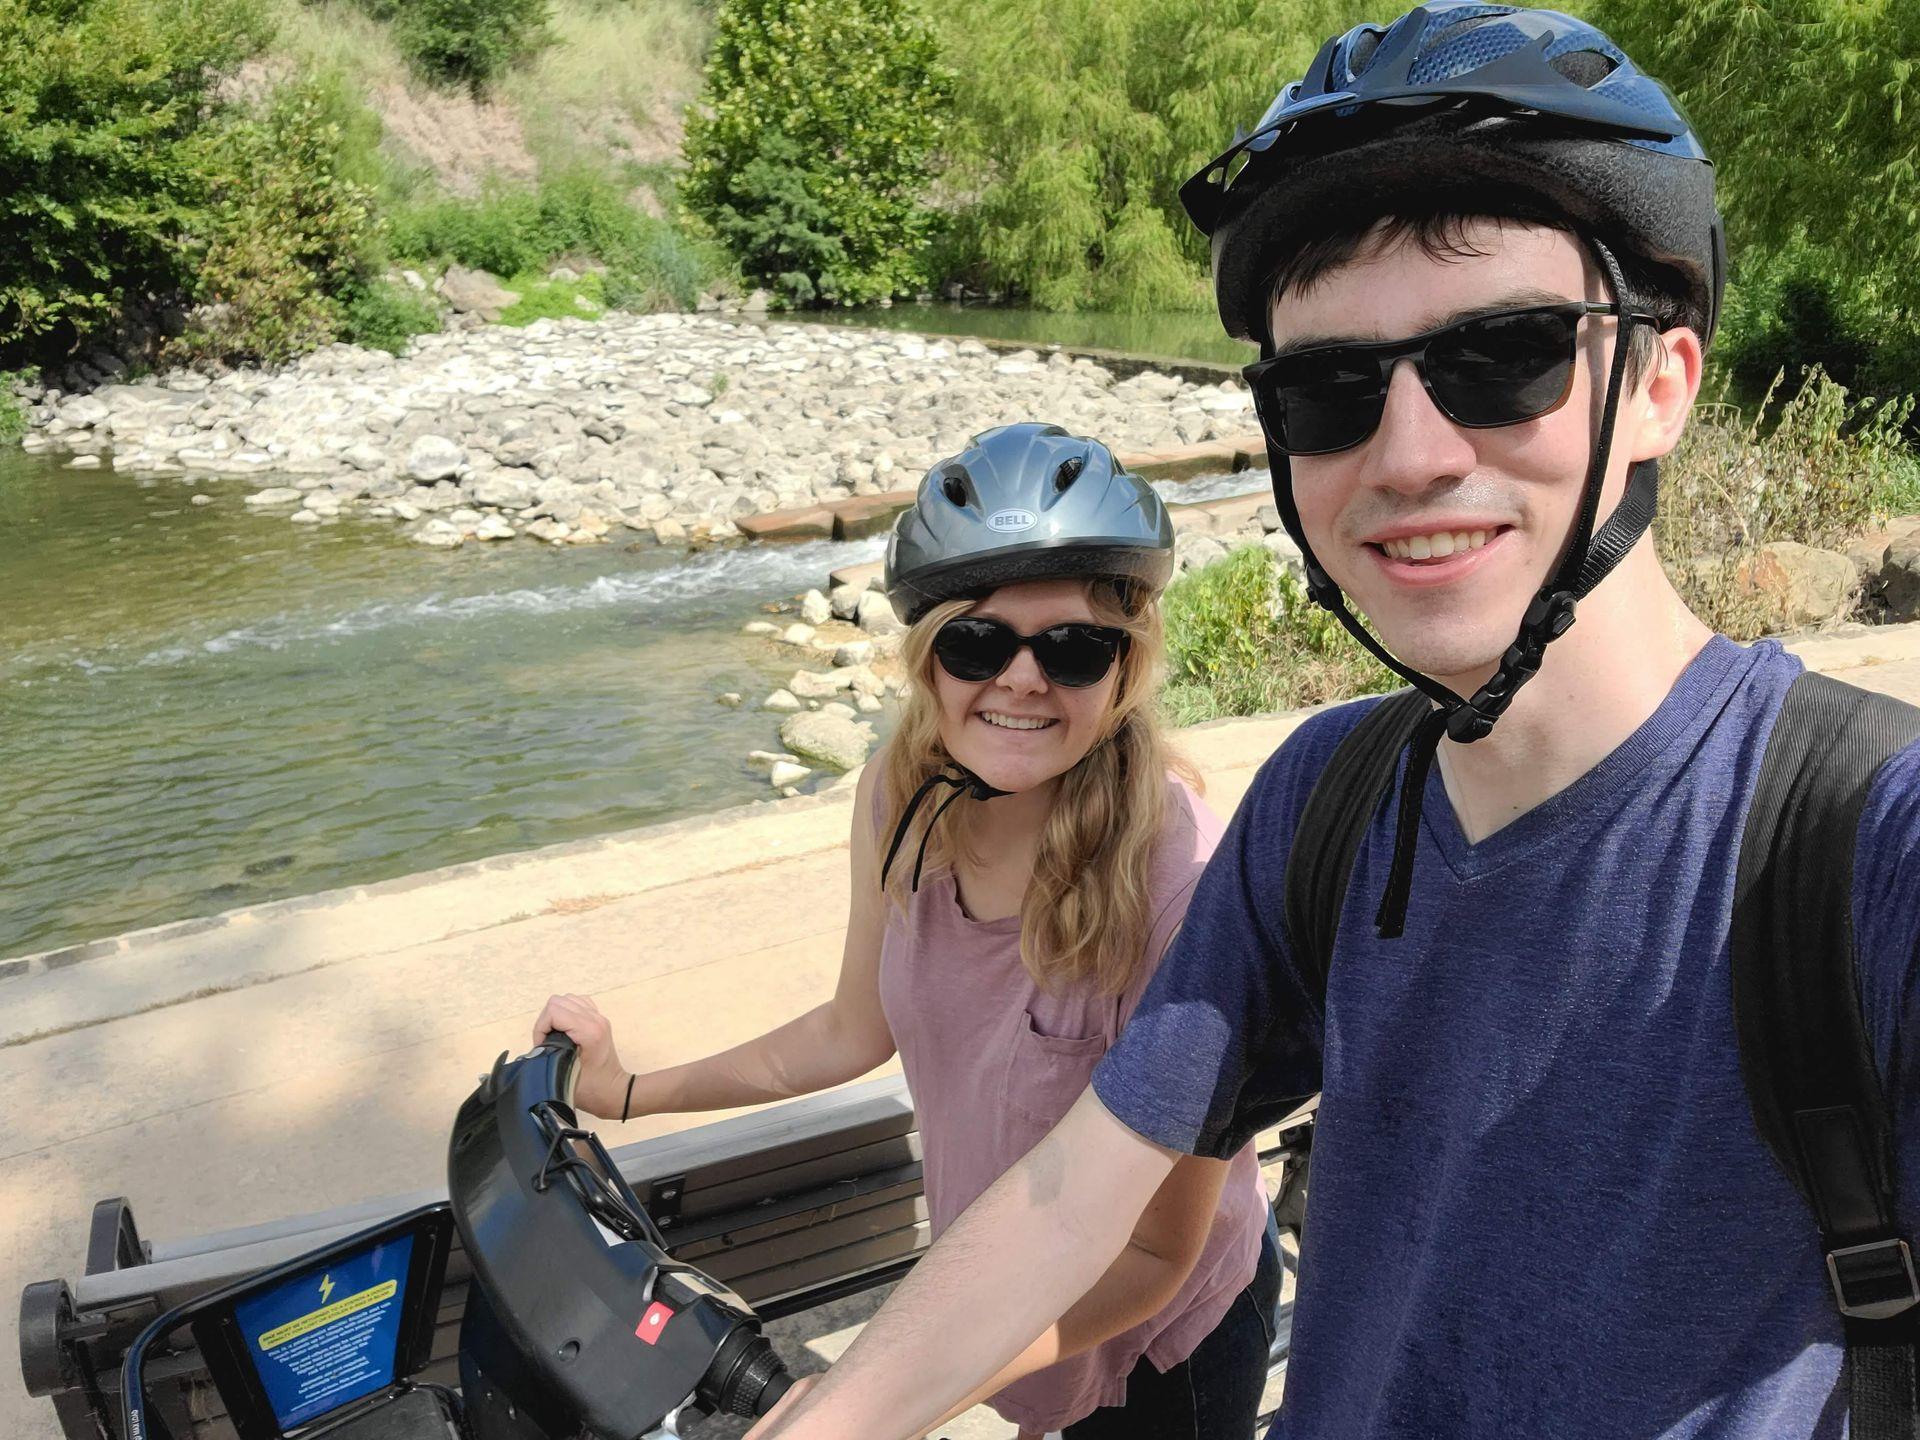 A selfie of Lydia and Joe sitting on bikes and wearing helmets. There is a river with rocks in the background.